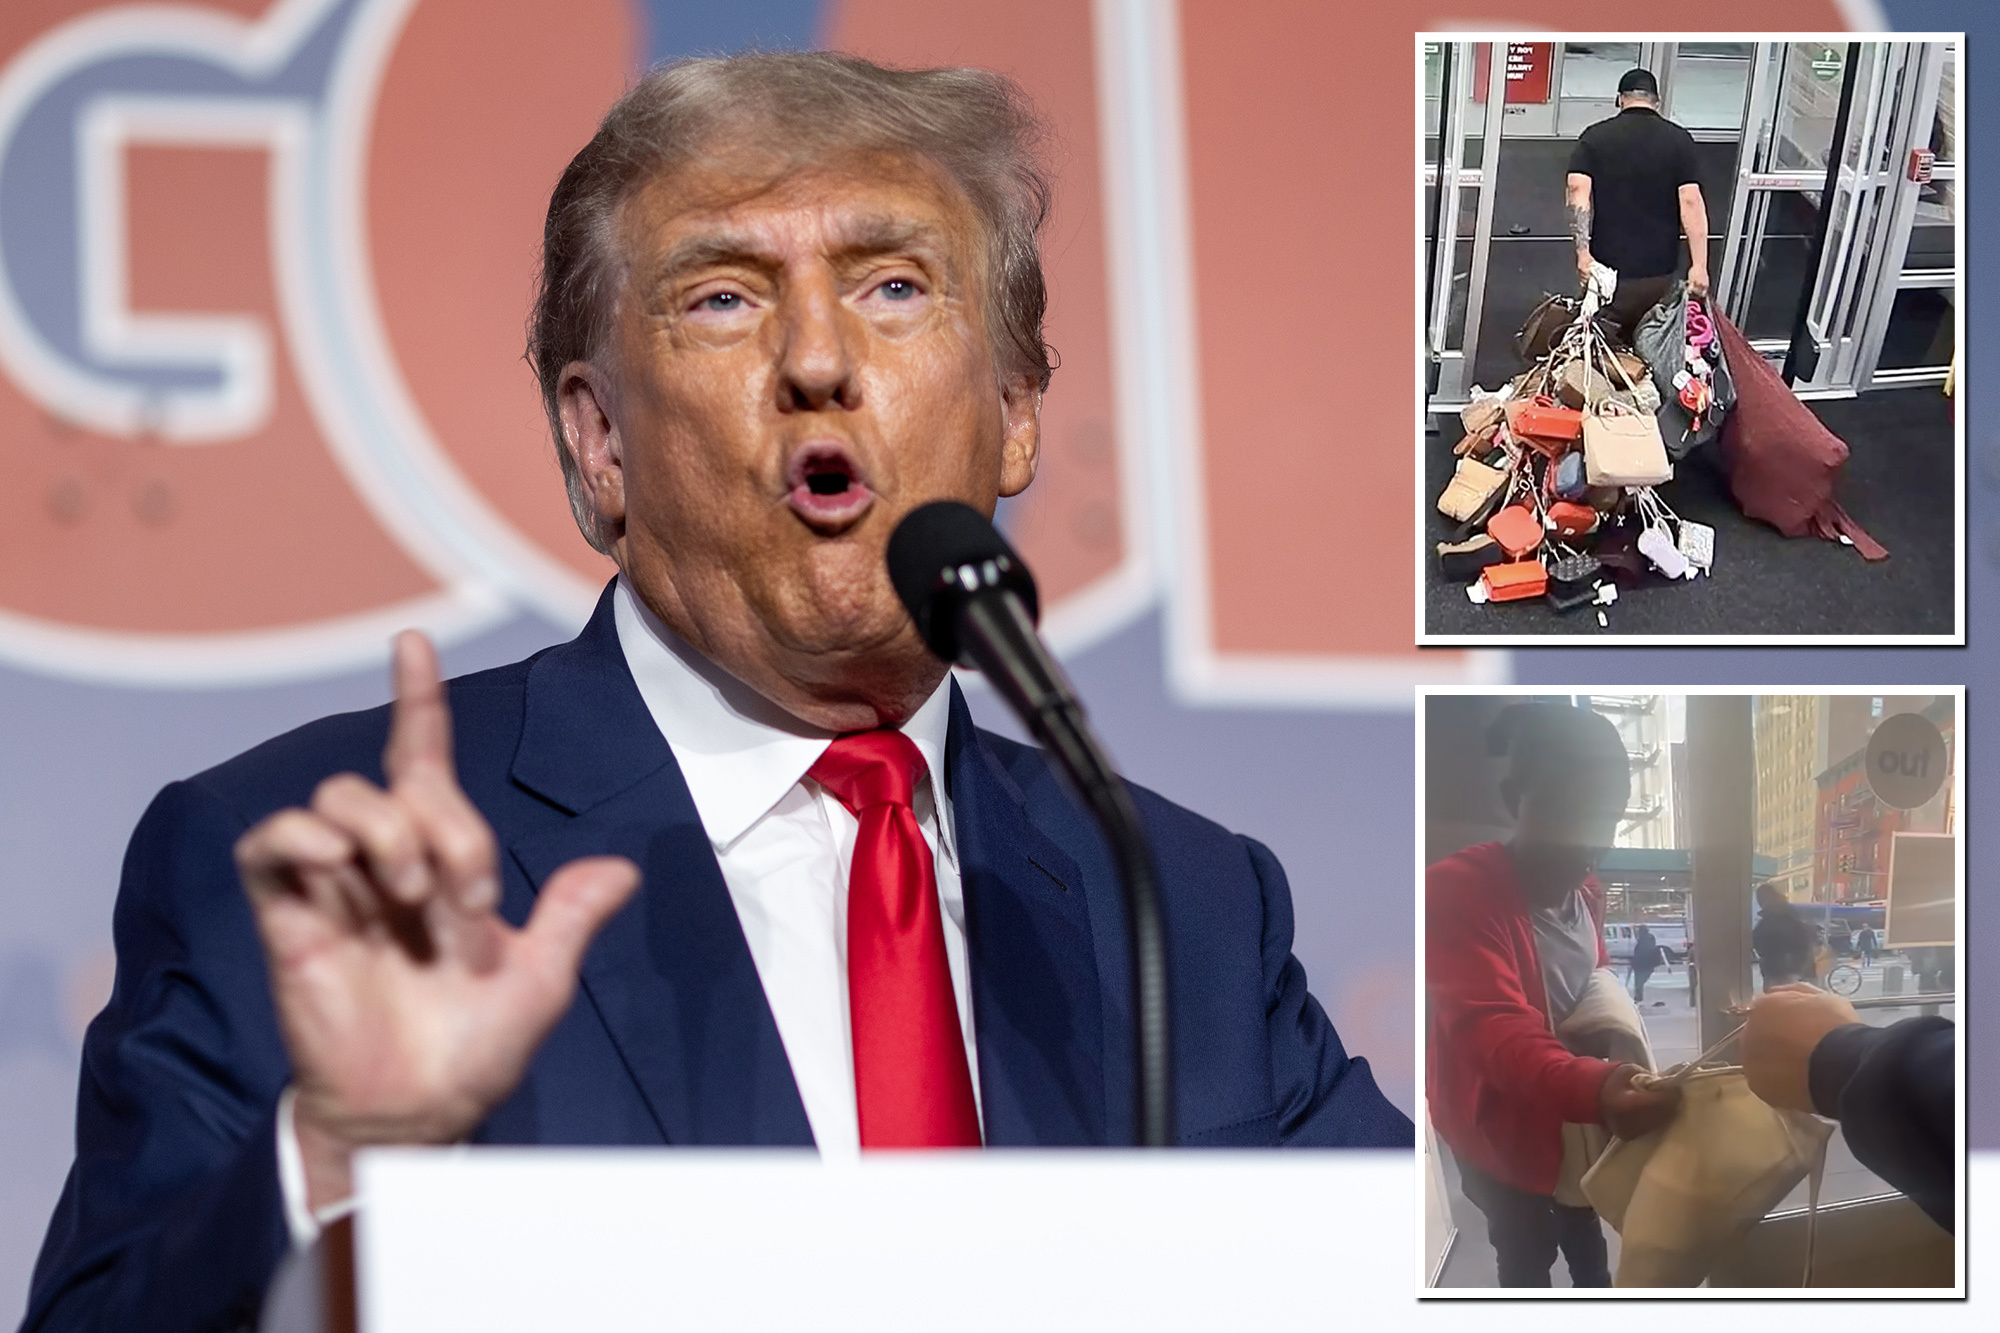 Trump Calls For Shoplifters To Be Shot To ‘stop All Of The Pillaging And Theft’ During Fiery Speech